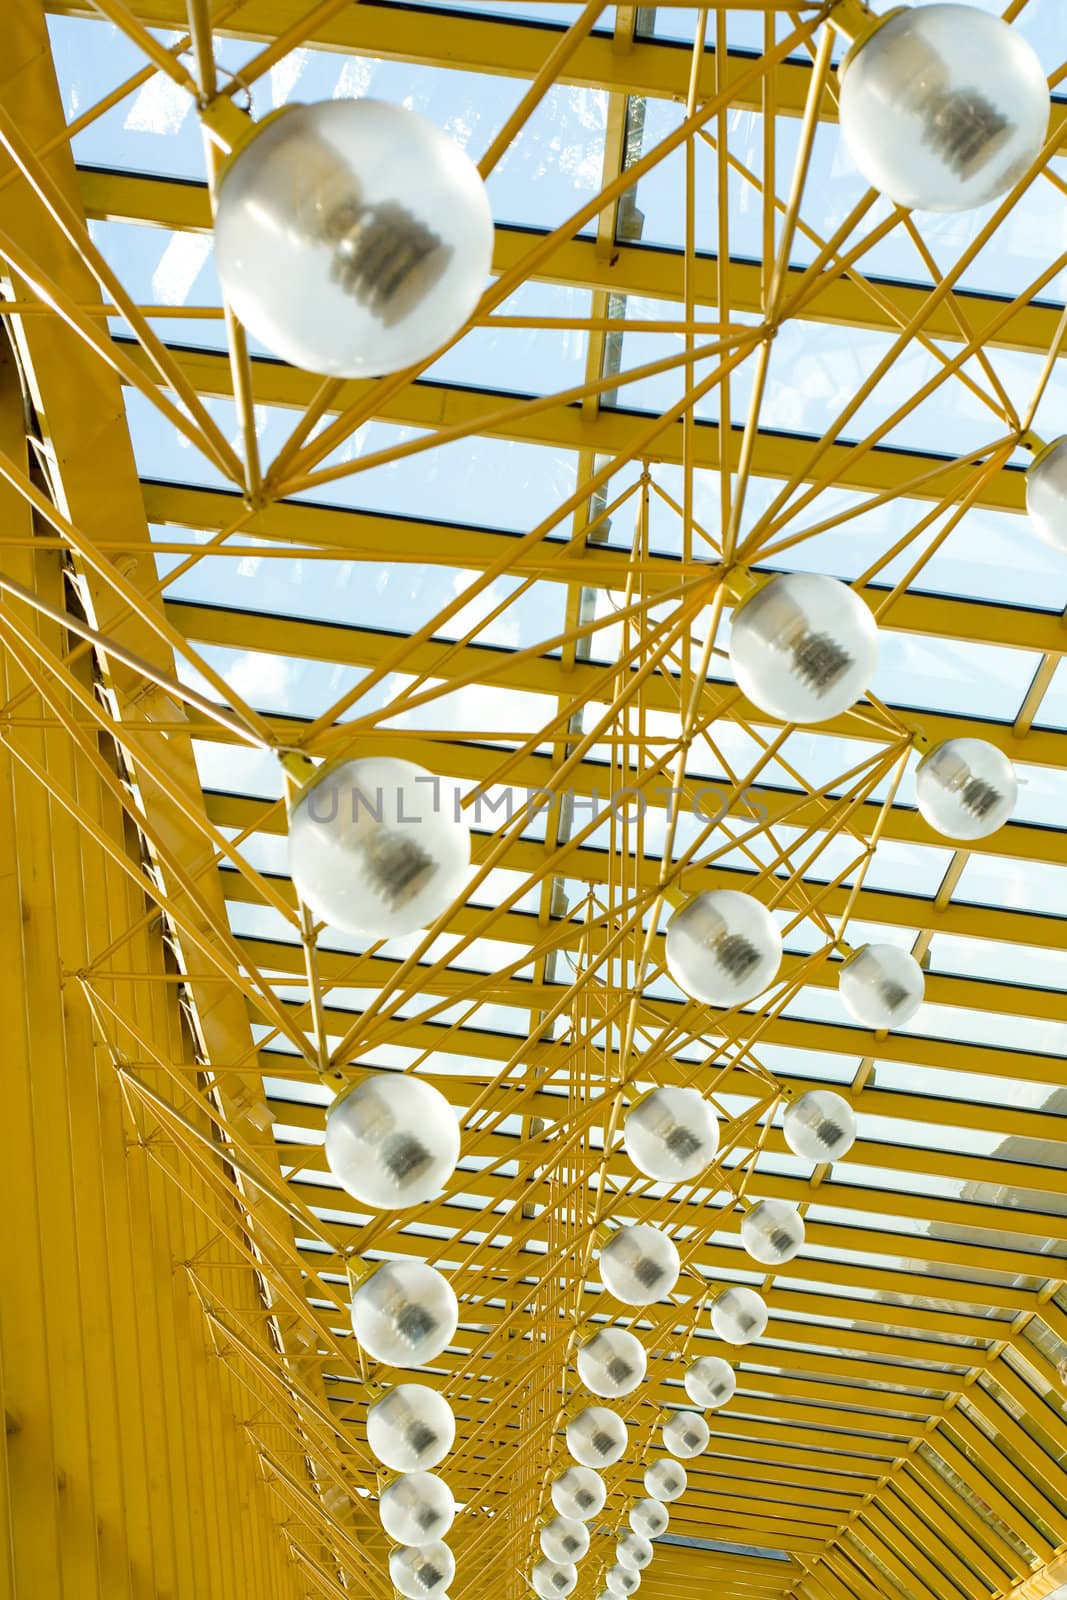 Glass and yellow metal construction 2 by Sergius